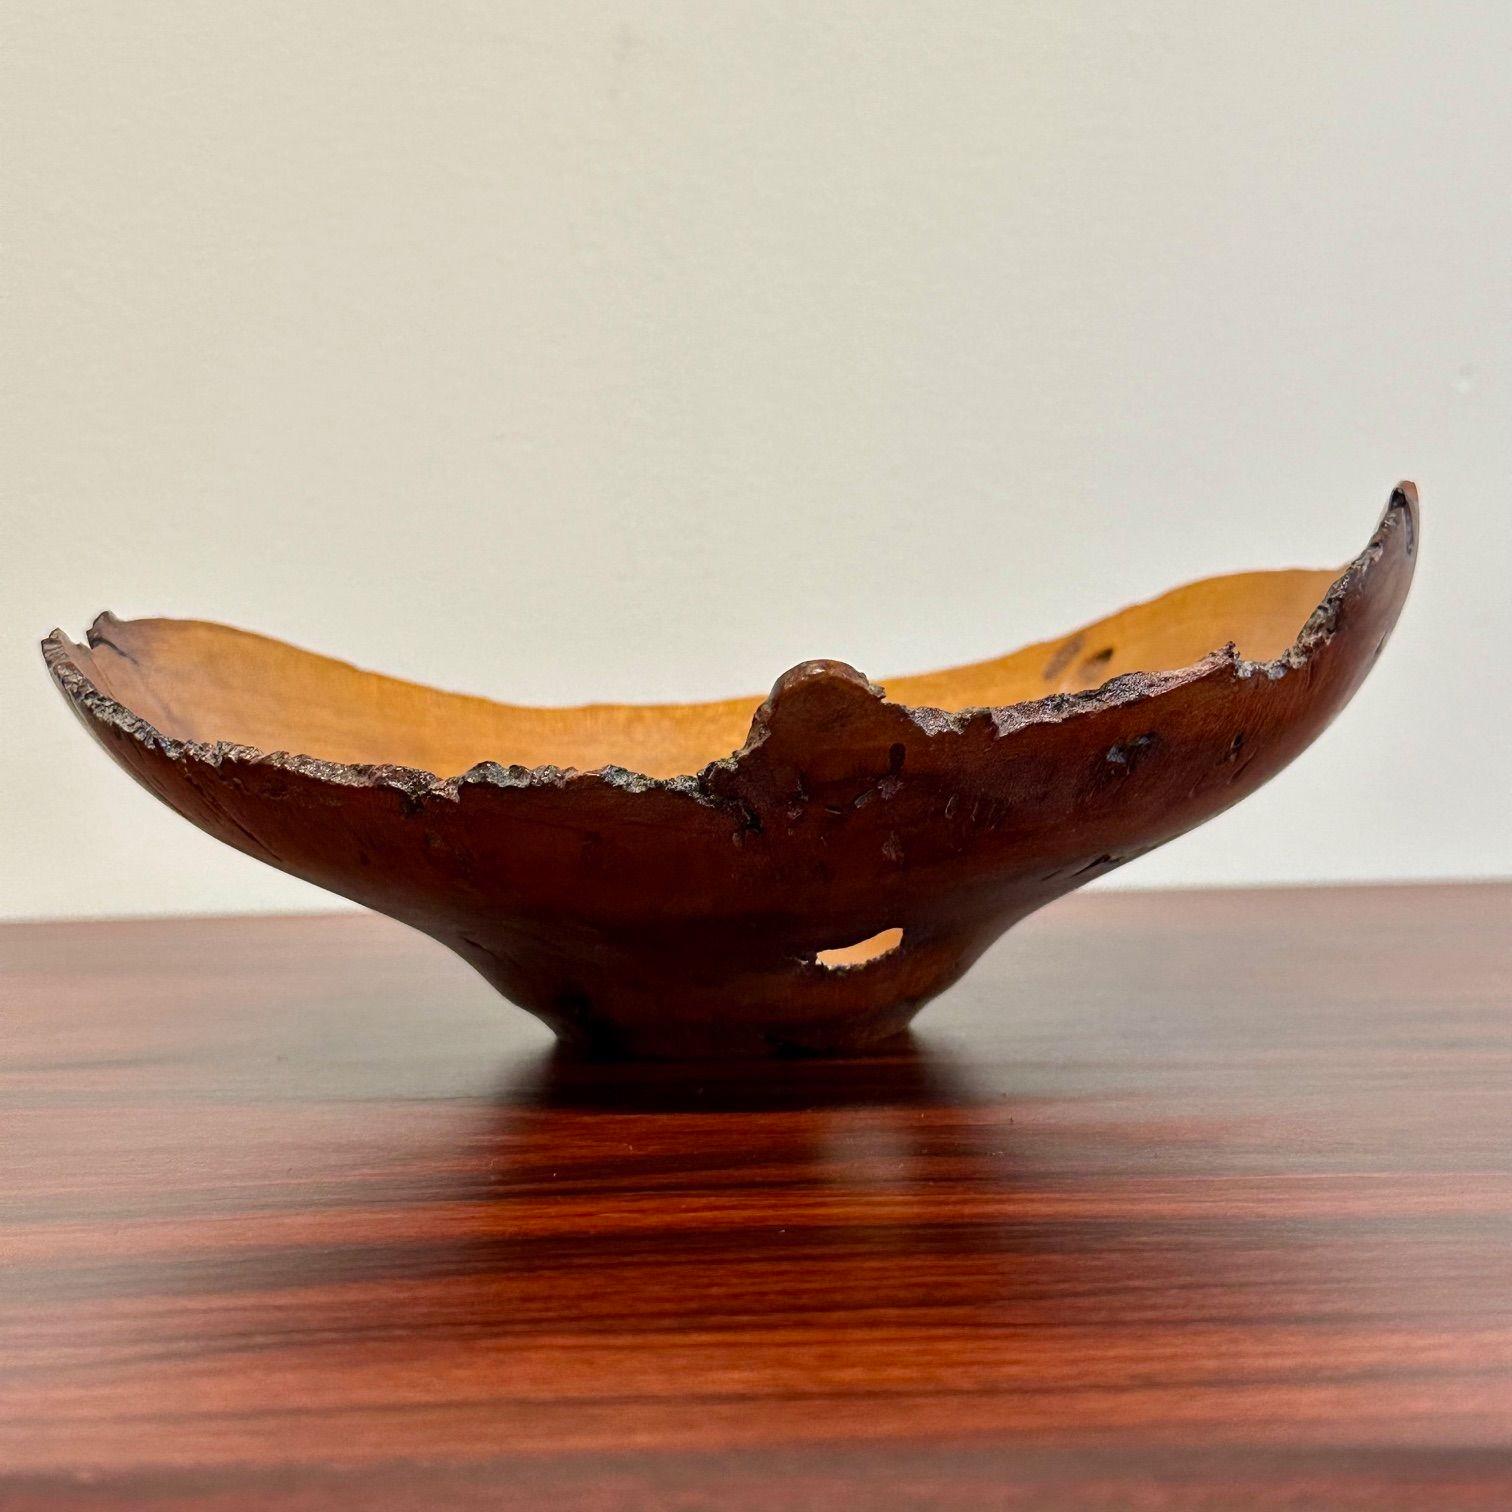 Mid-Century Modern Artisan Studio Made Bowl / Vessel, Cherry Burl

Unique live edge tableware entirely made of cherry burl by Tom Frey. This work is signed and dated on it's underside, 'Tom Frey, 8/95'

Cherry Burl
United States, 1975s

Height: 3 in